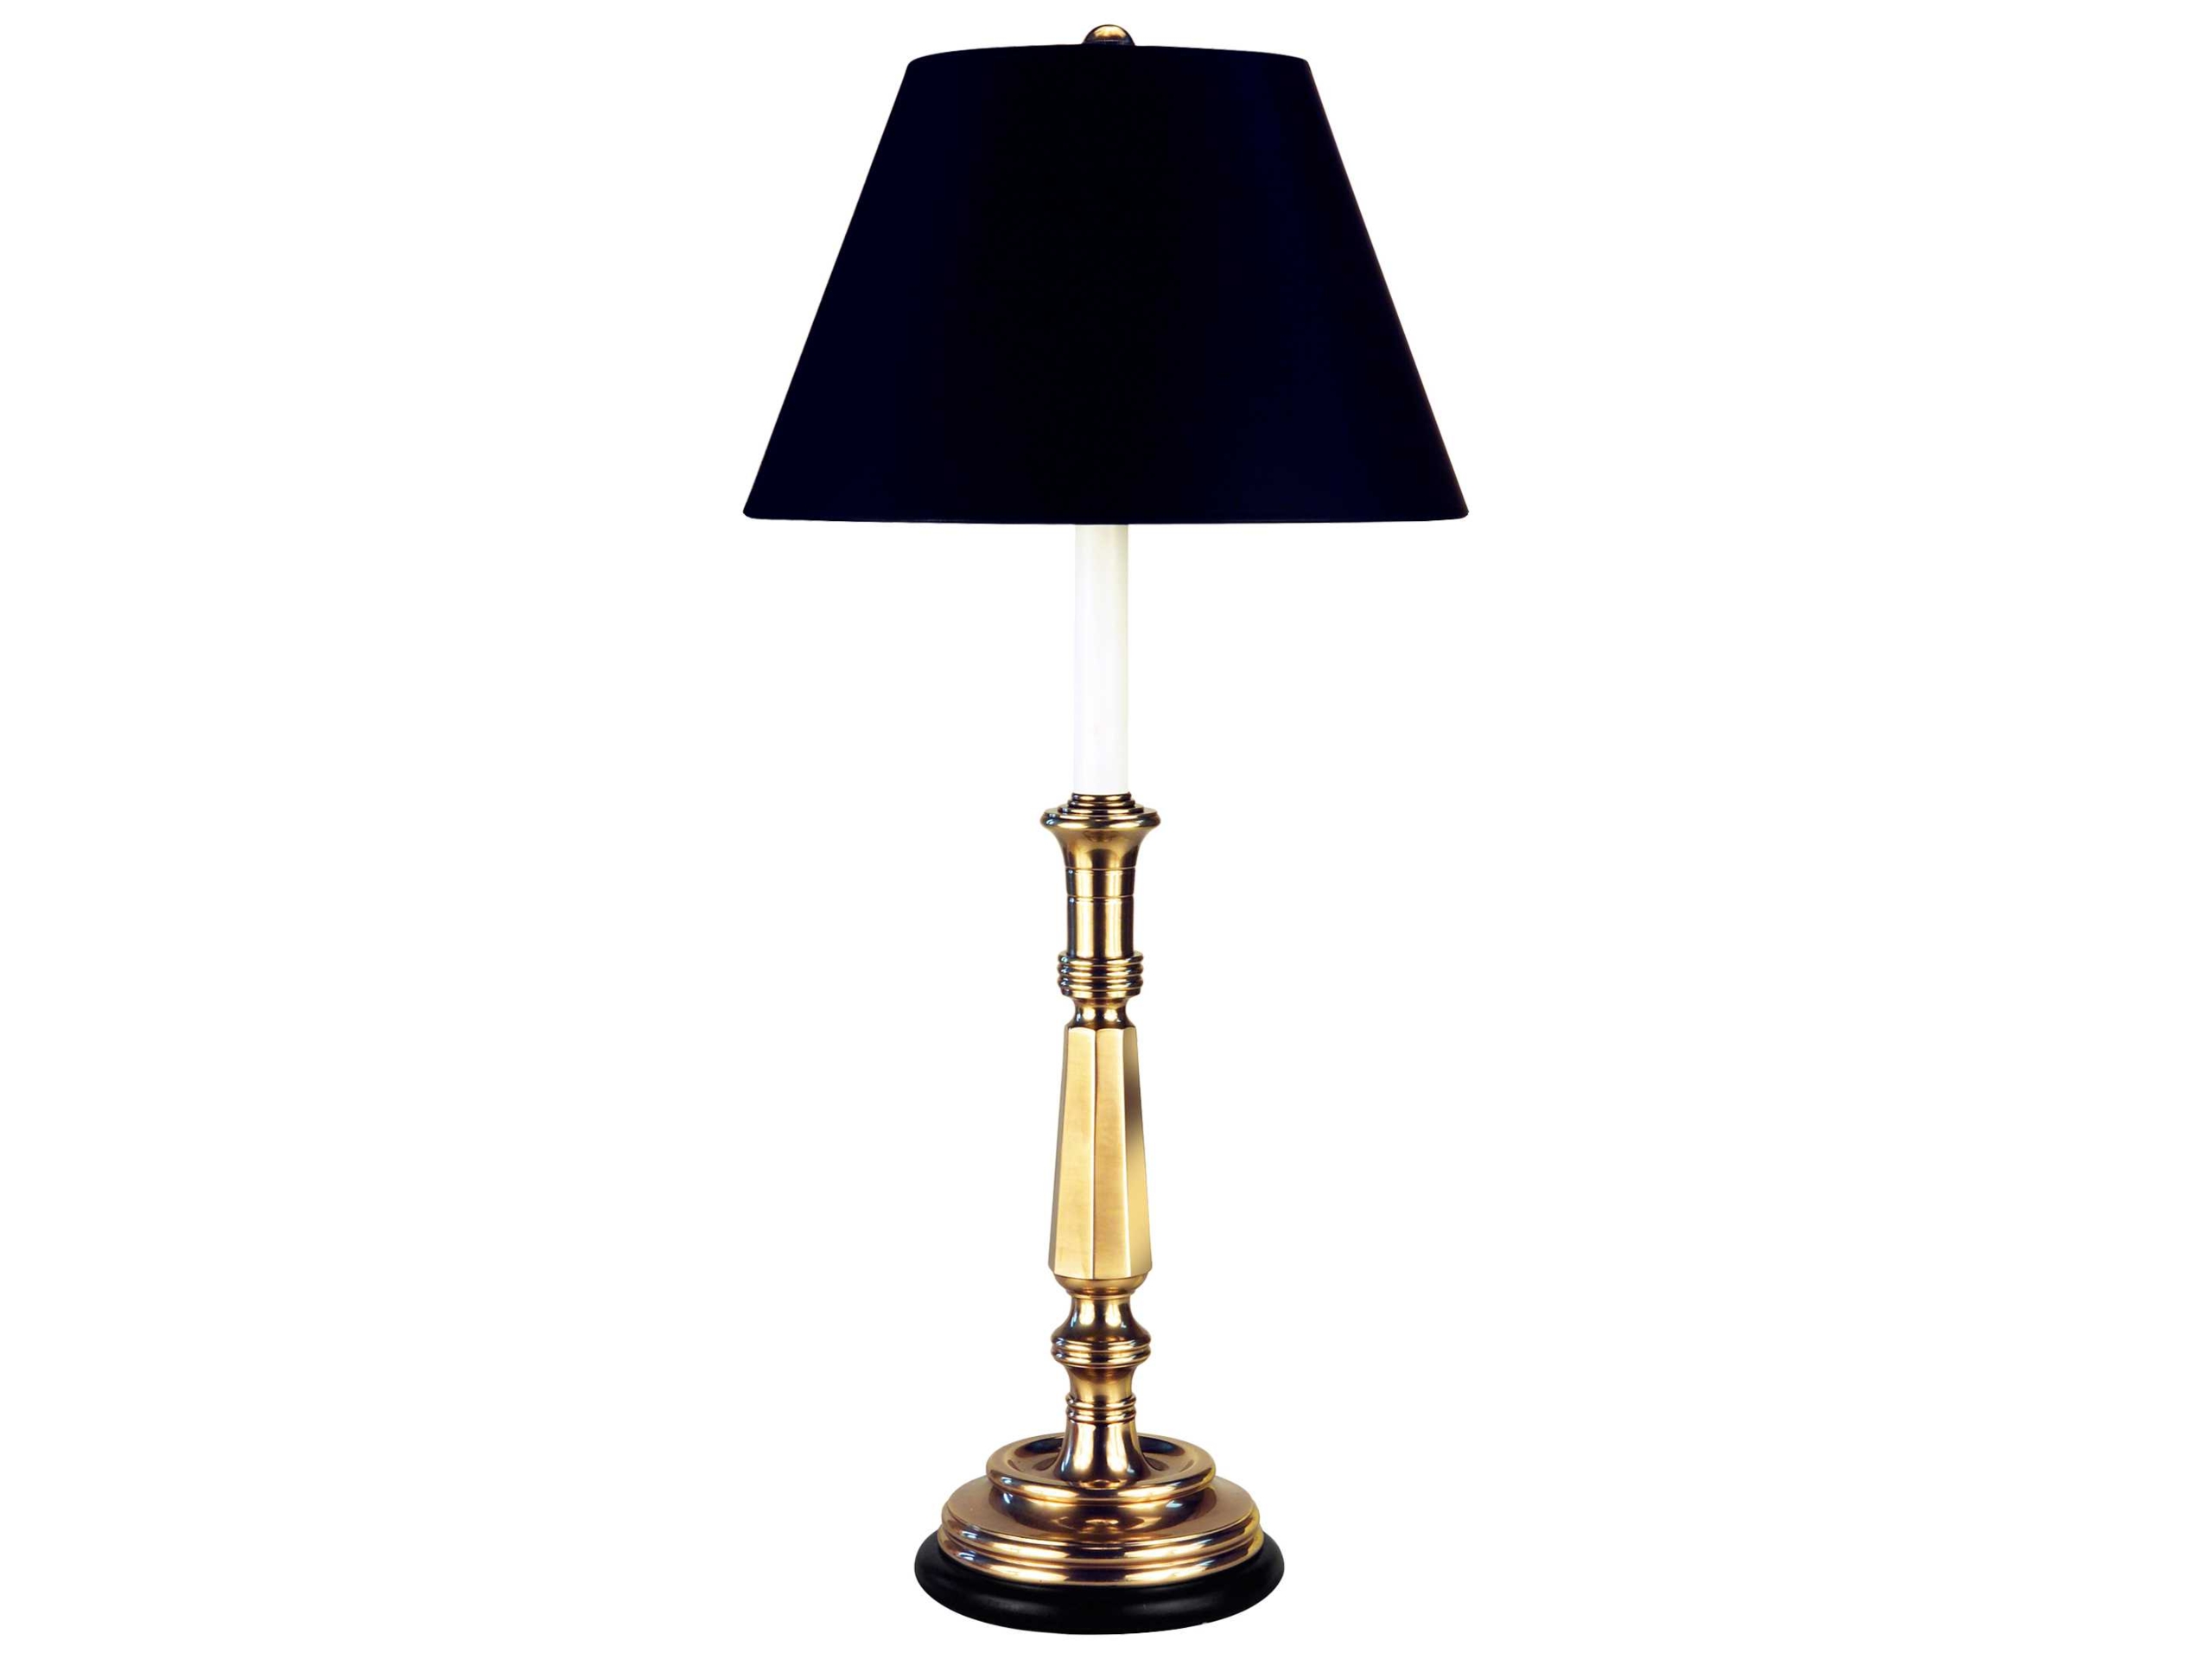 Candlestick table lamps